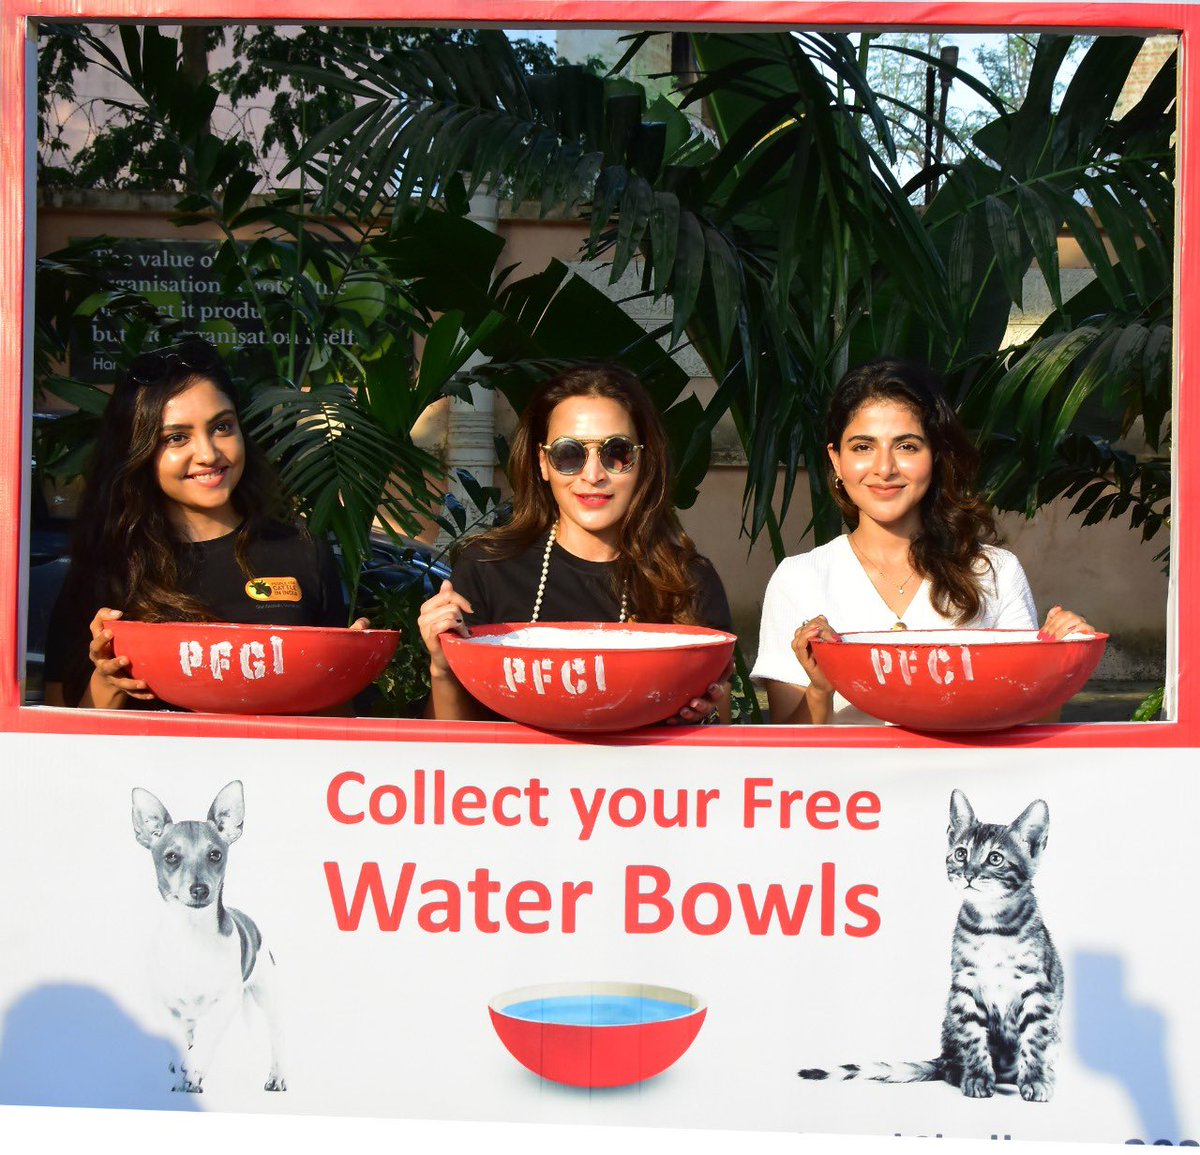 #WaterBowlChallenge2022 was officially inaugurated by @Ishmenon, @ash_rajinikanth in the presence of @Suchitrasrao & others

An initiative by @PFCII since its inception 2014, celebrating 10 yrs #AnimalWelfare  - @arun_8778

@VanquishMedia__ @divomovies